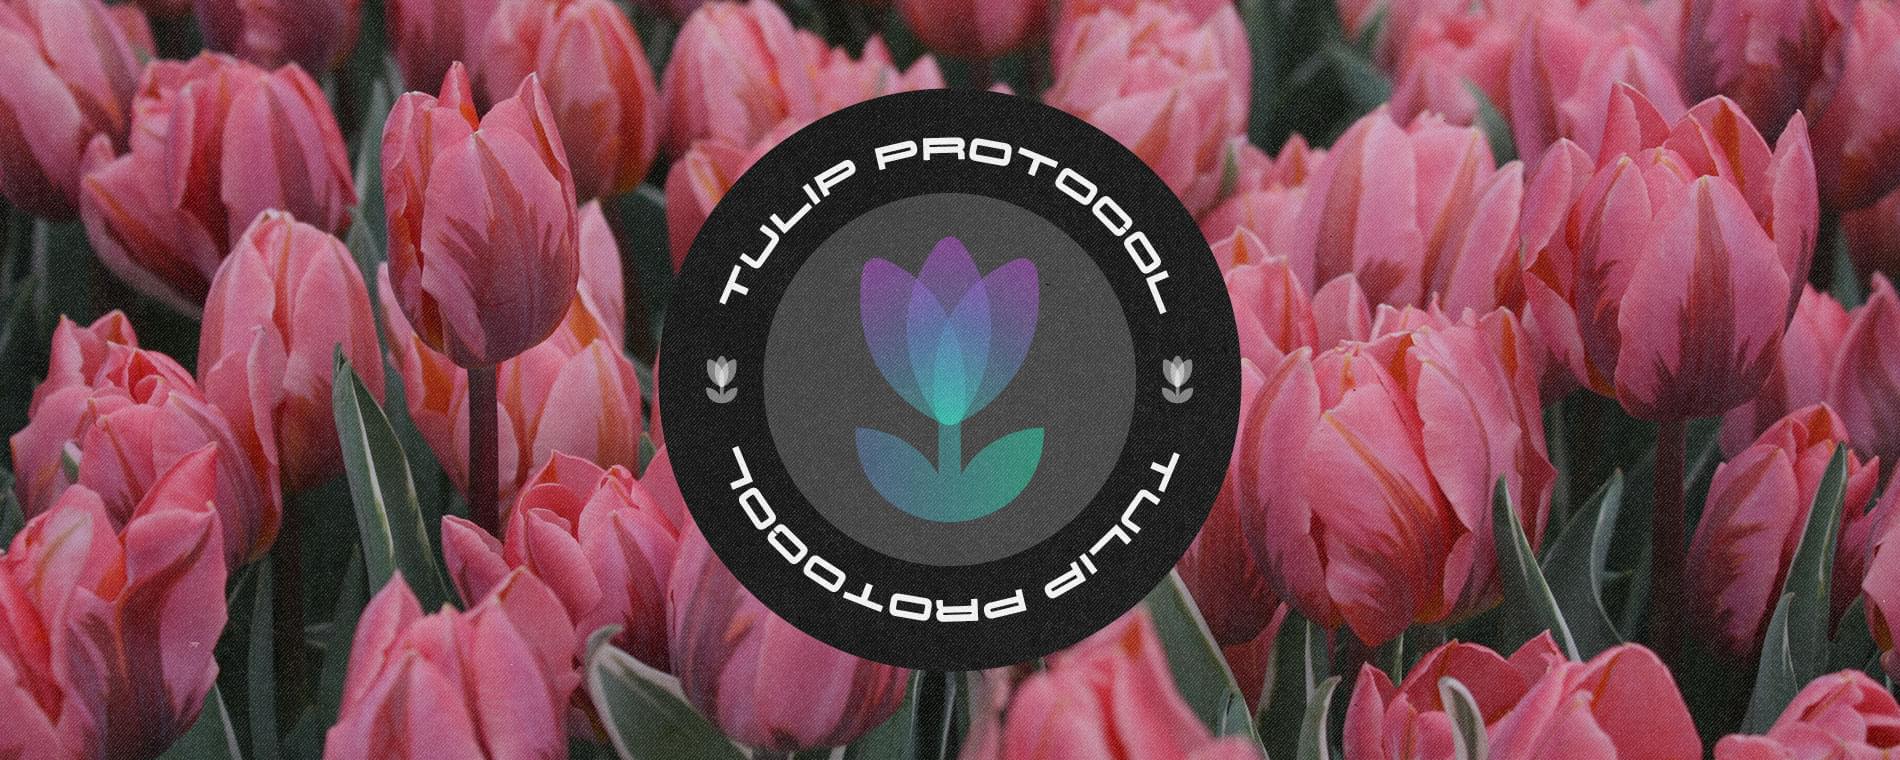 How to use Tulip Protocol and Tulip Coin